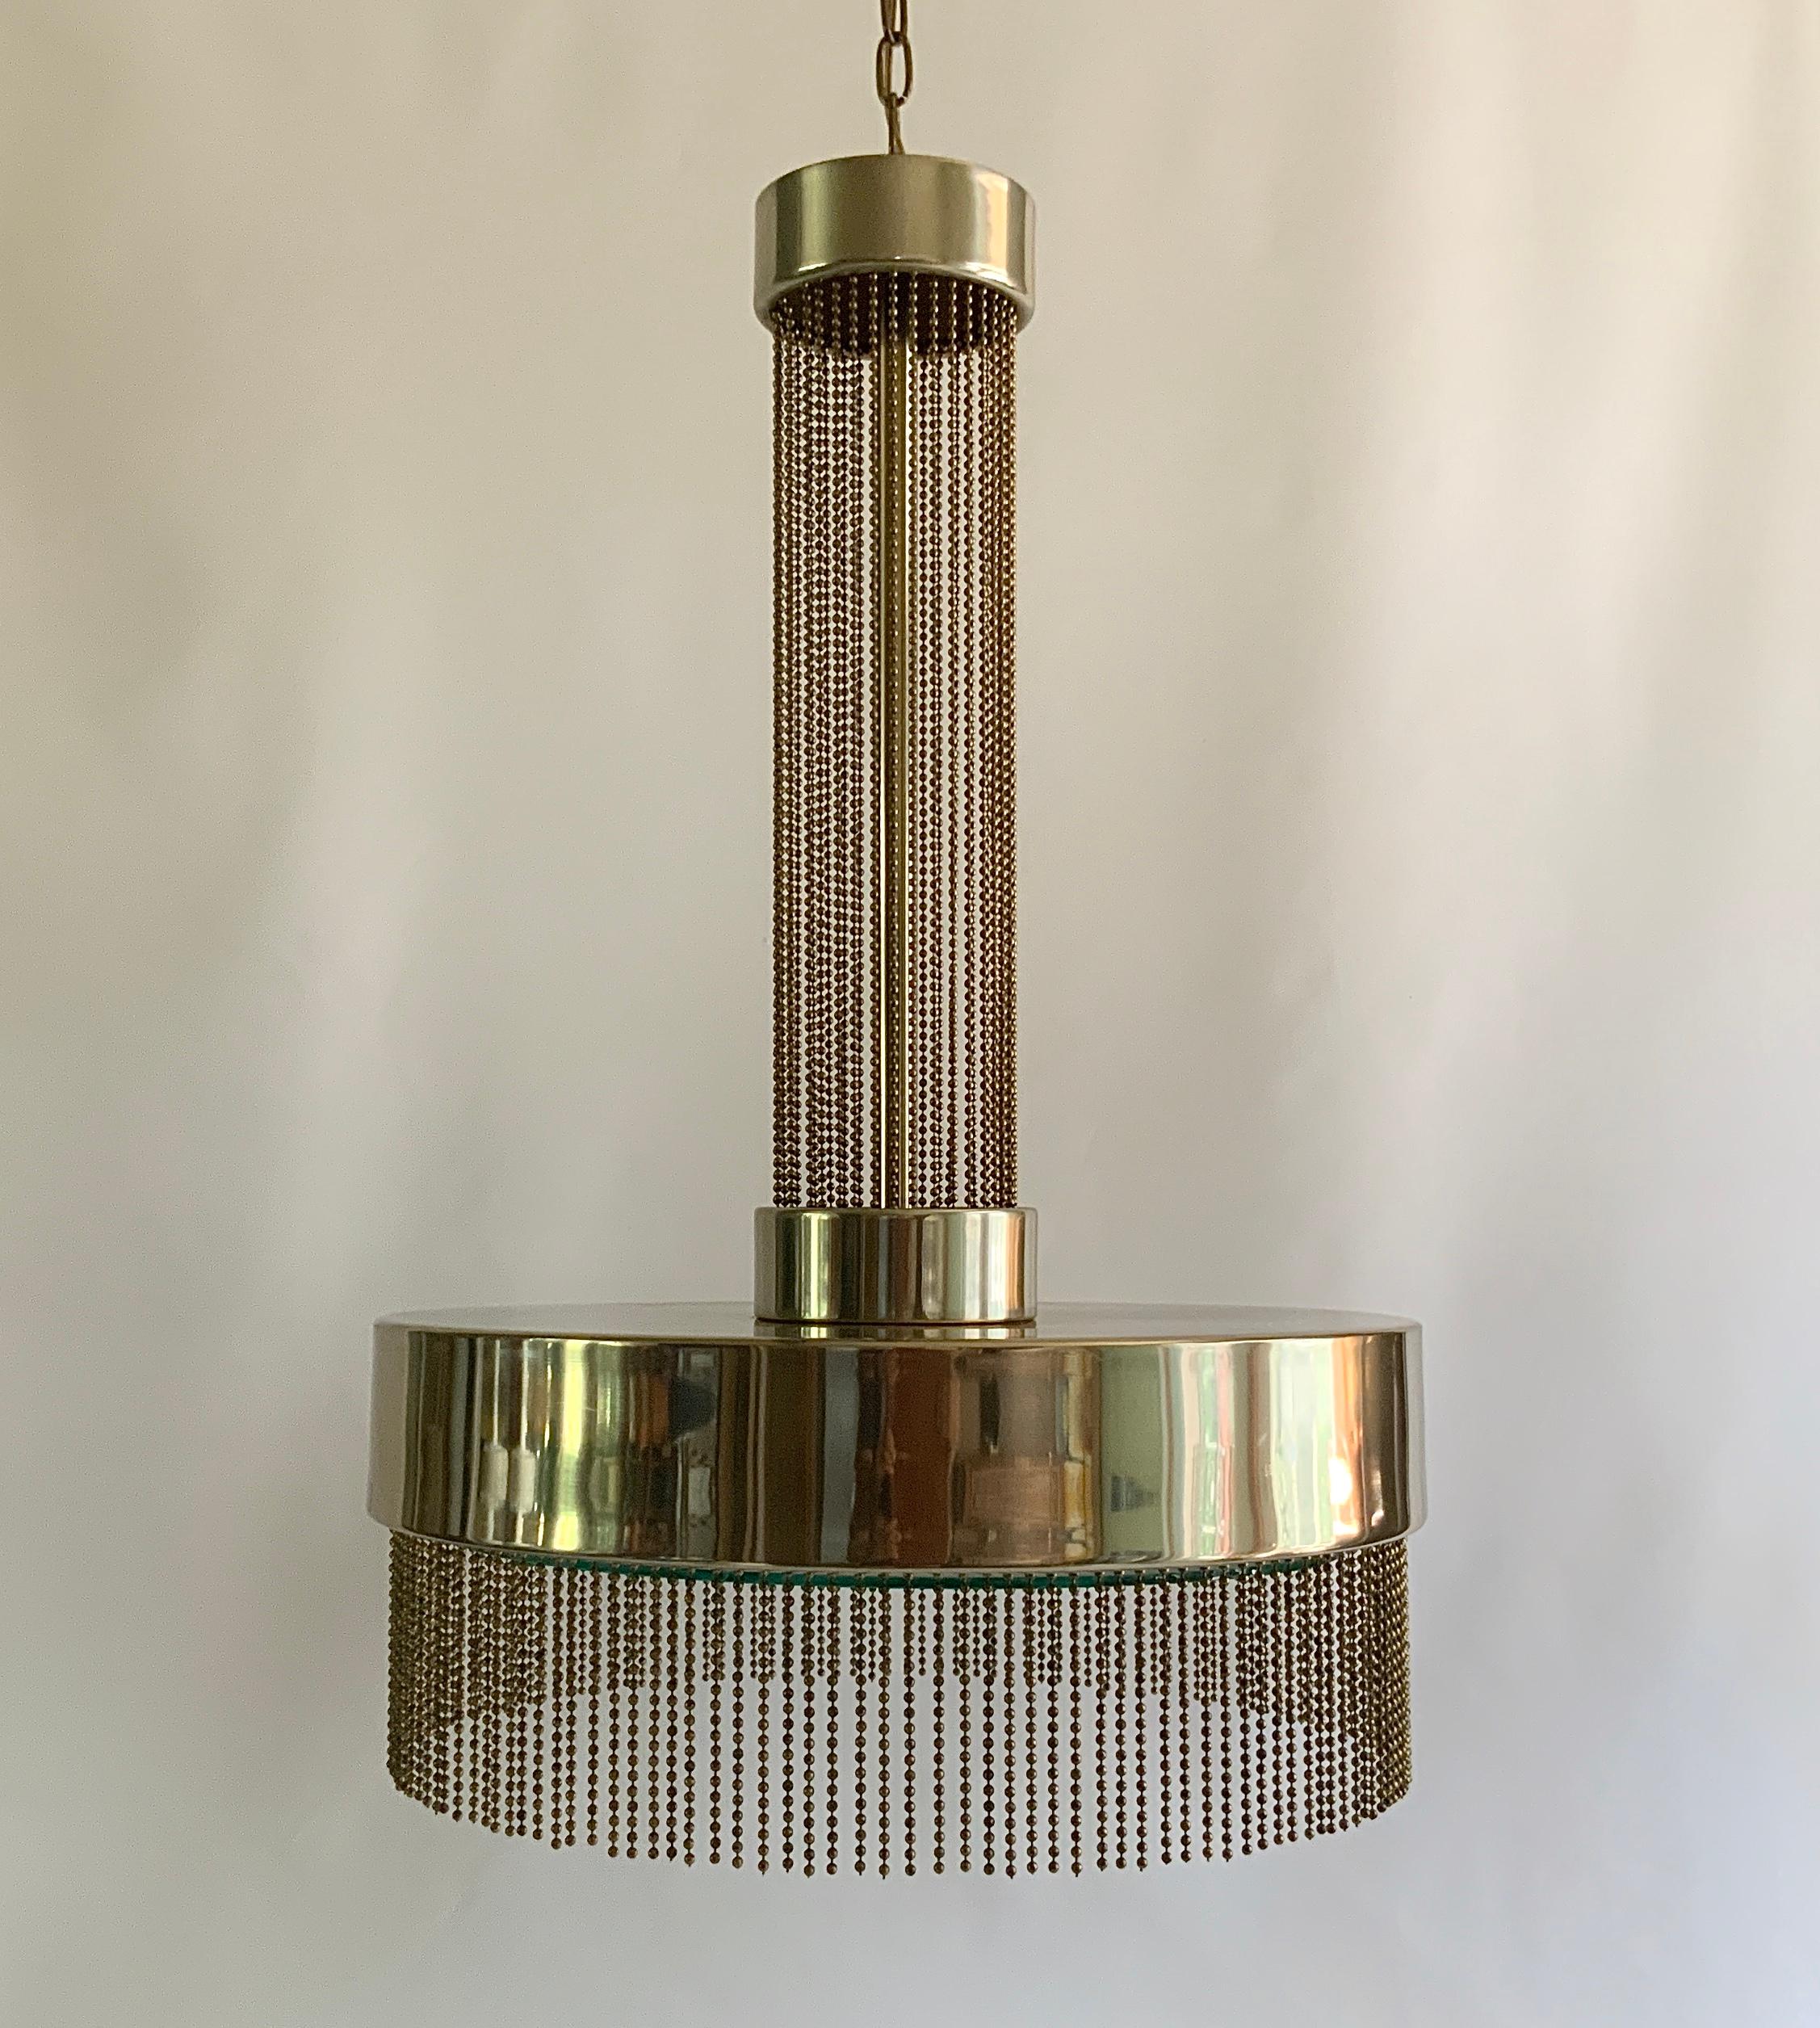 Late 20th Century Modern French Brass Chandelier by Pierre Cardin for Laurel